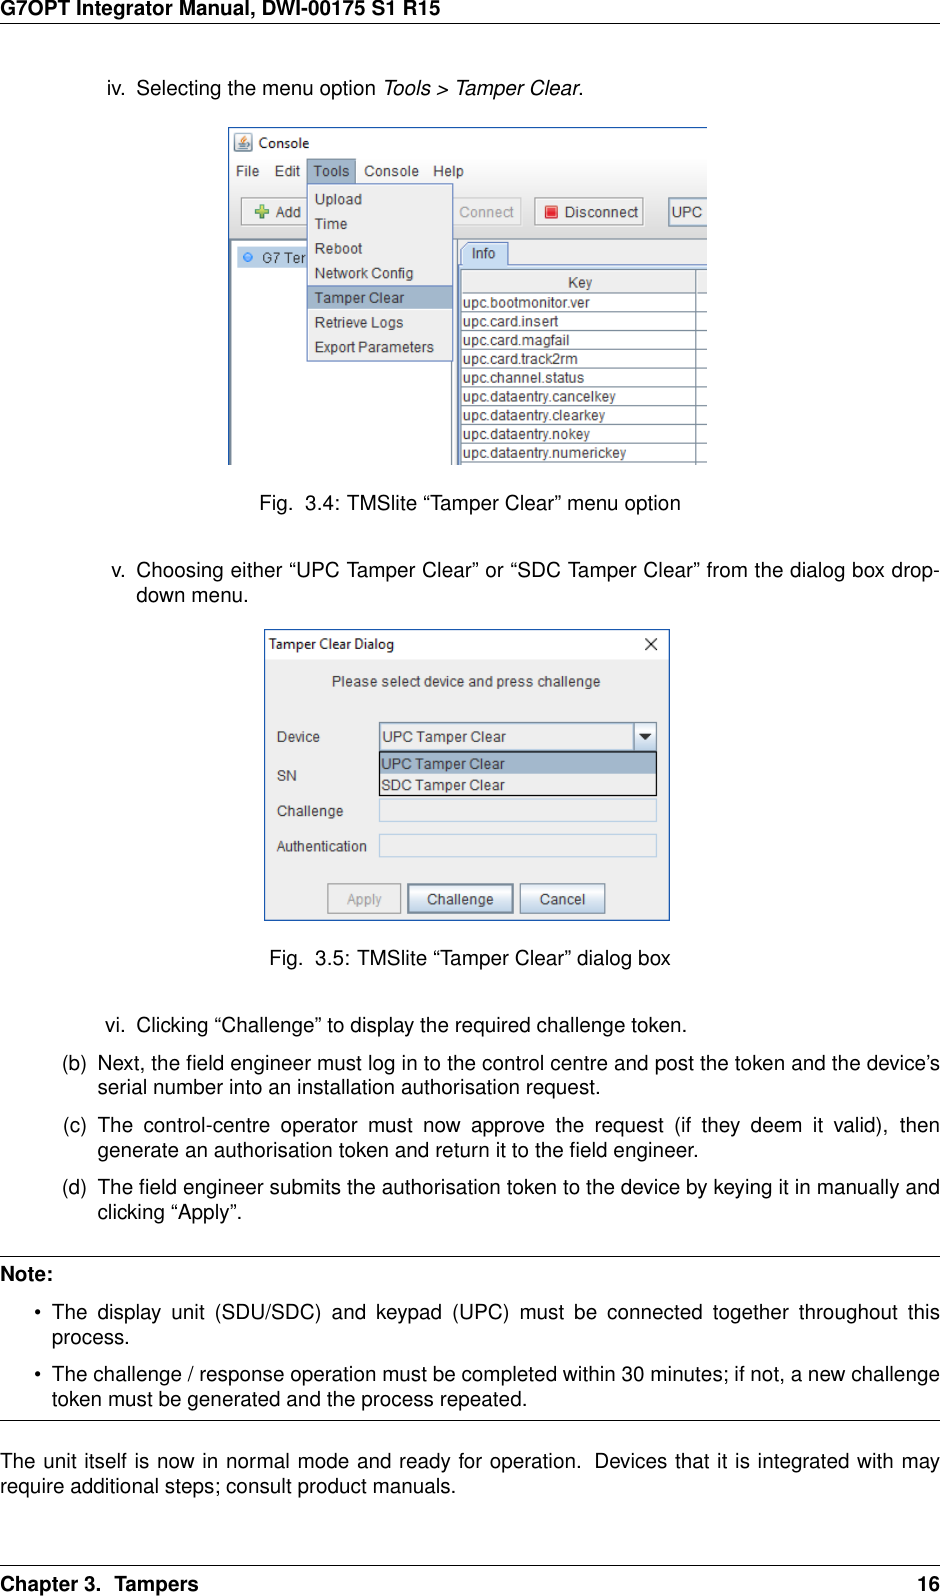 G7OPT Integrator Manual, DWI-00175 S1 R15iv. Selecting the menu option Tools &gt; Tamper Clear.Fig. 3.4: TMSlite “Tamper Clear” menu optionv. Choosing either “UPC Tamper Clear” or “SDC Tamper Clear” from the dialog box drop-down menu.Fig. 3.5: TMSlite “Tamper Clear” dialog boxvi. Clicking “Challenge” to display the required challenge token.(b) Next, the ﬁeld engineer must log in to the control centre and post the token and the device’sserial number into an installation authorisation request.(c) The control-centre operator must now approve the request (if they deem it valid), thengenerate an authorisation token and return it to the ﬁeld engineer.(d) The ﬁeld engineer submits the authorisation token to the device by keying it in manually andclicking “Apply”.Note:• The display unit (SDU/SDC) and keypad (UPC) must be connected together throughout thisprocess.• The challenge / response operation must be completed within 30 minutes; if not, a new challengetoken must be generated and the process repeated.The unit itself is now in normal mode and ready for operation. Devices that it is integrated with mayrequire additional steps; consult product manuals.Chapter 3. Tampers 16